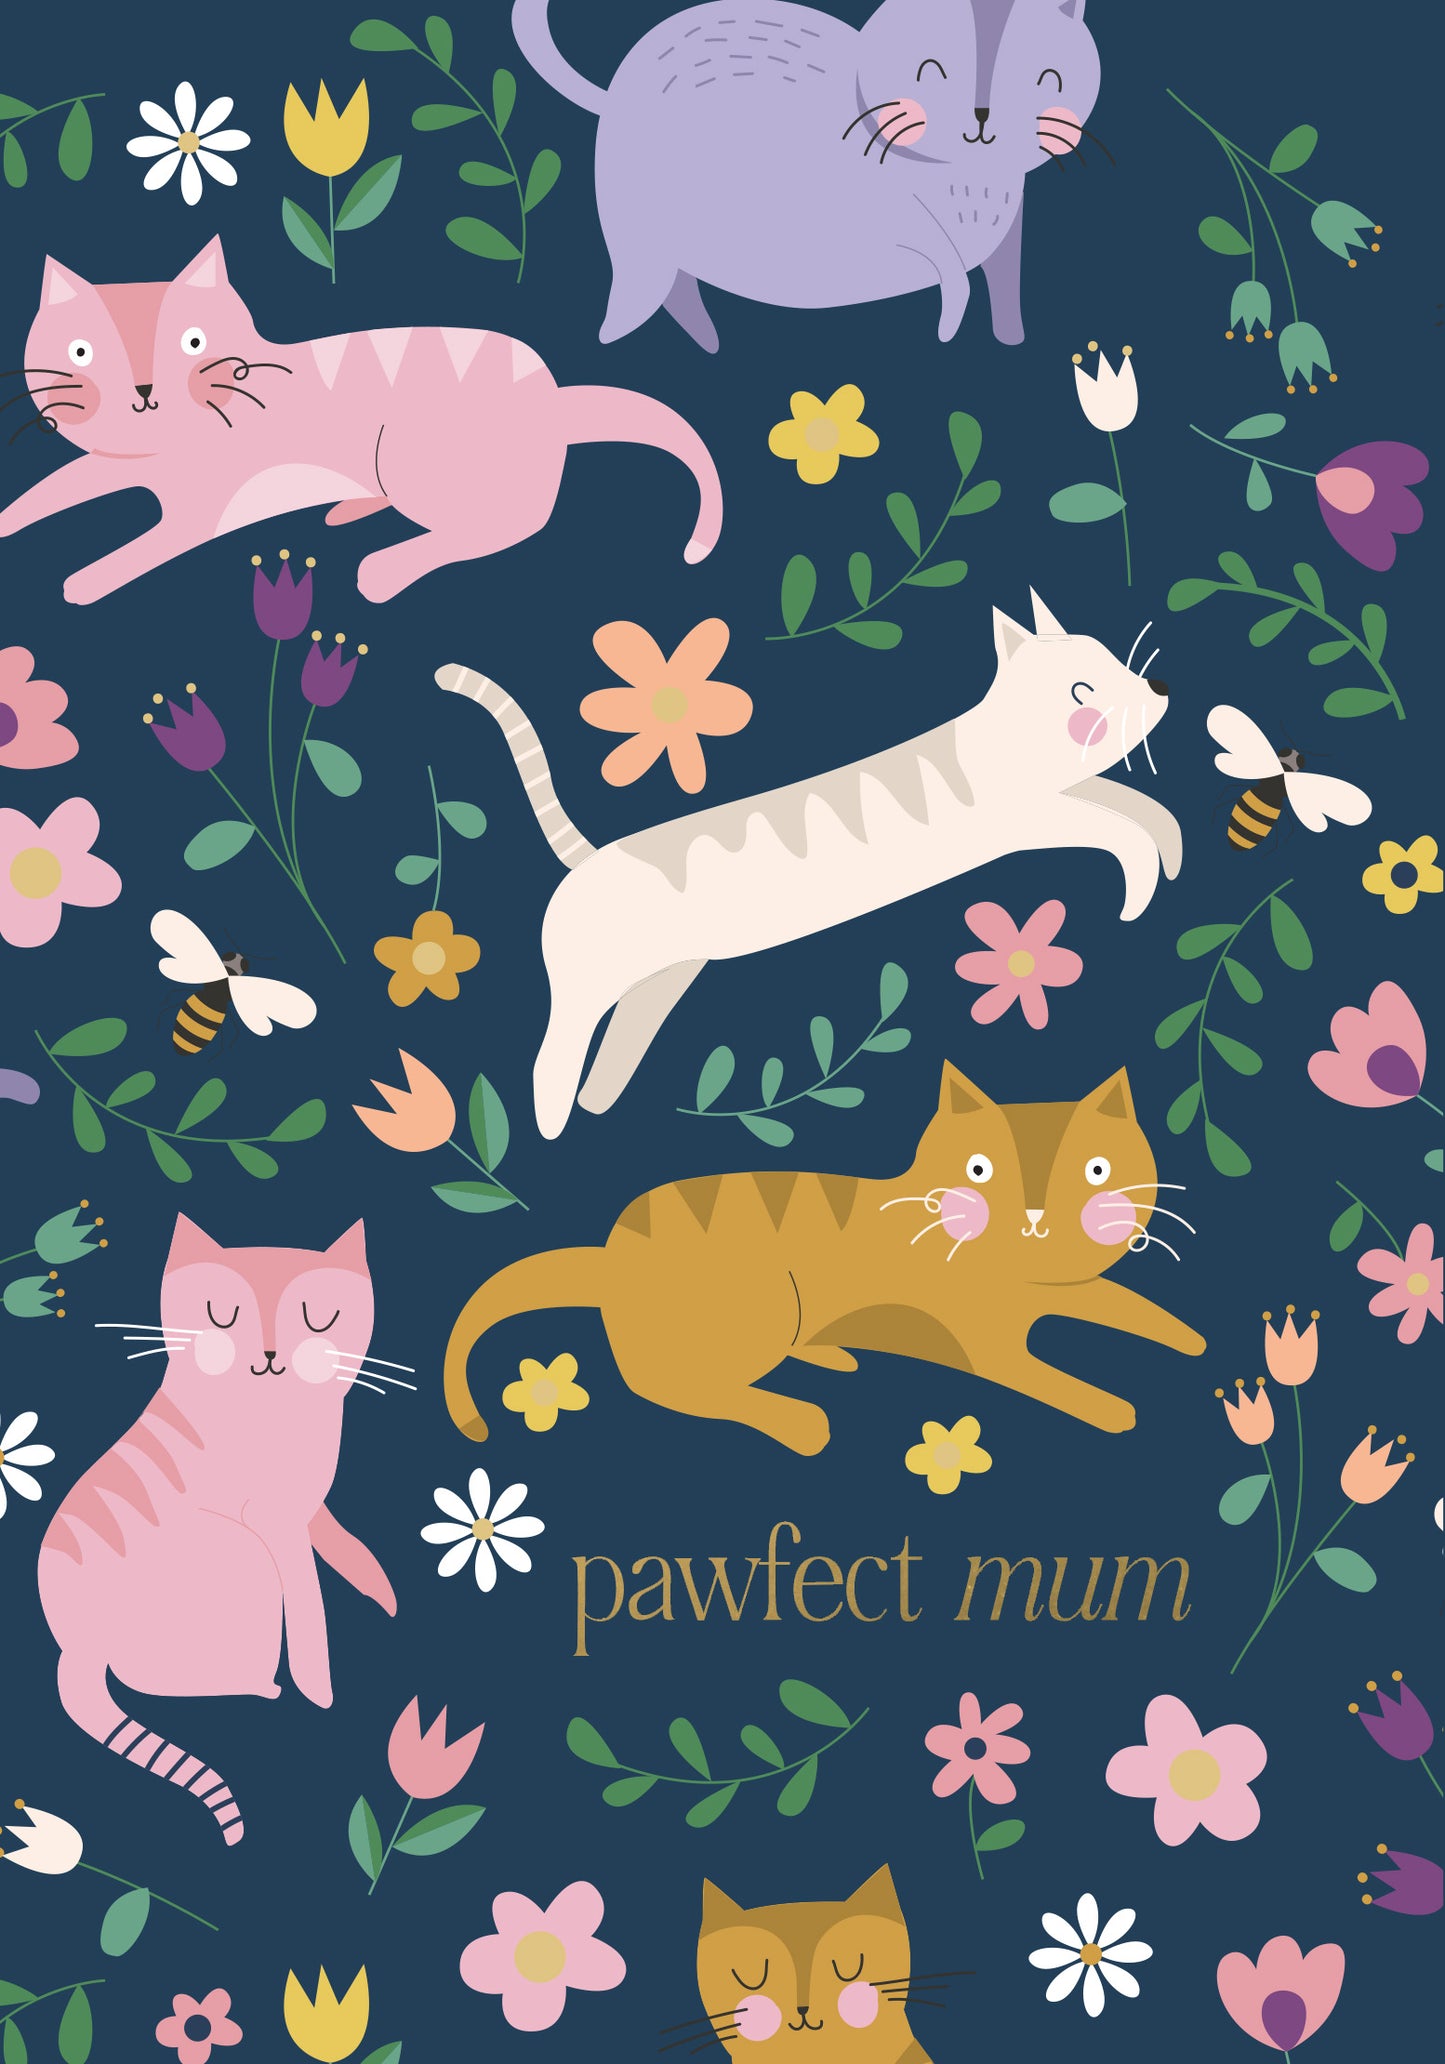 Greeting Card Mothers Day - Pawfect Mum